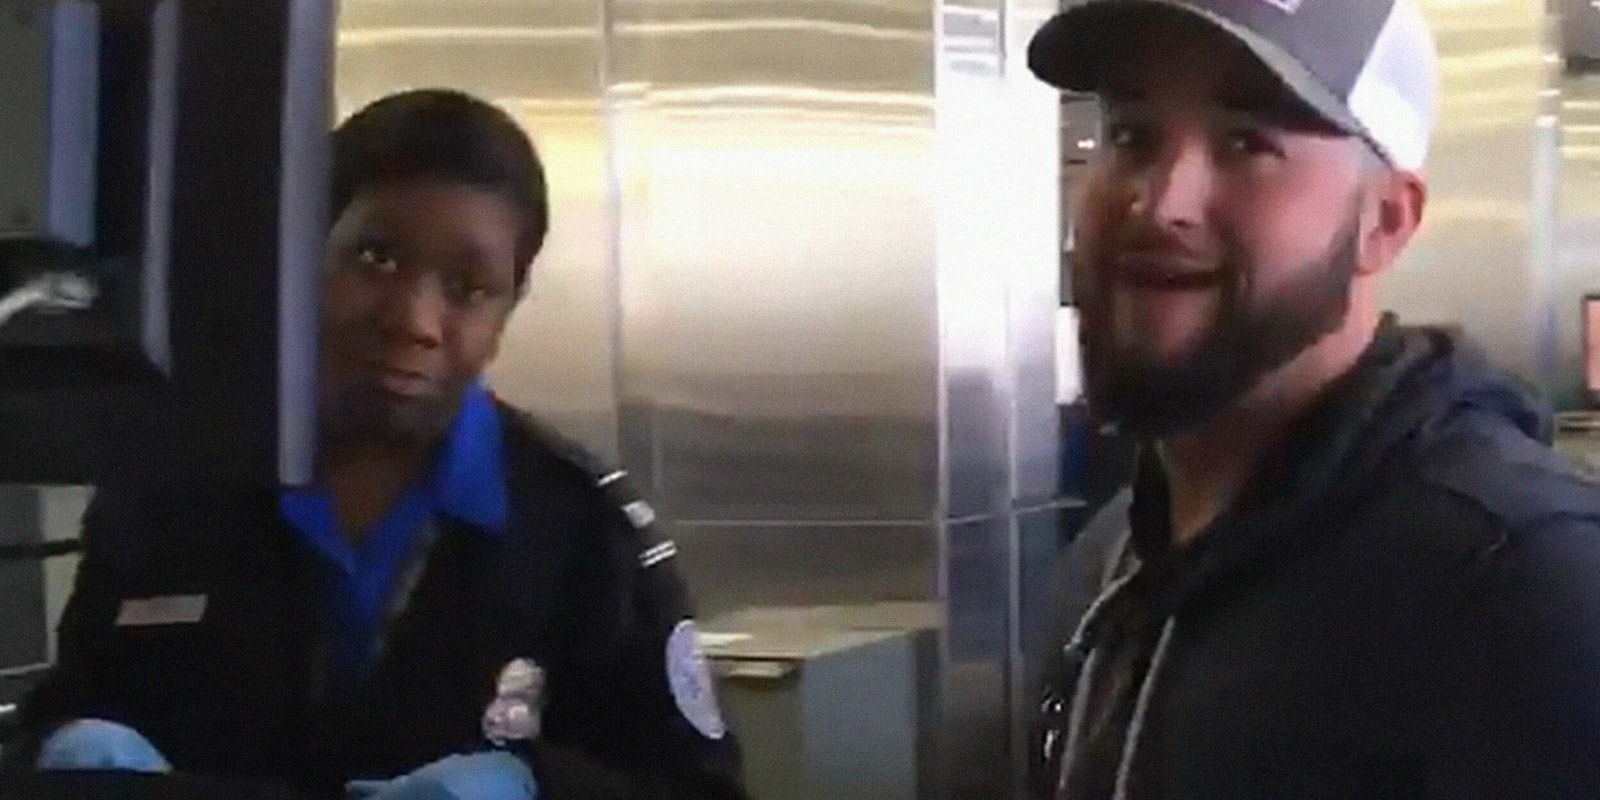 TSA worker and pranked son react to hidden sex toy in luggage